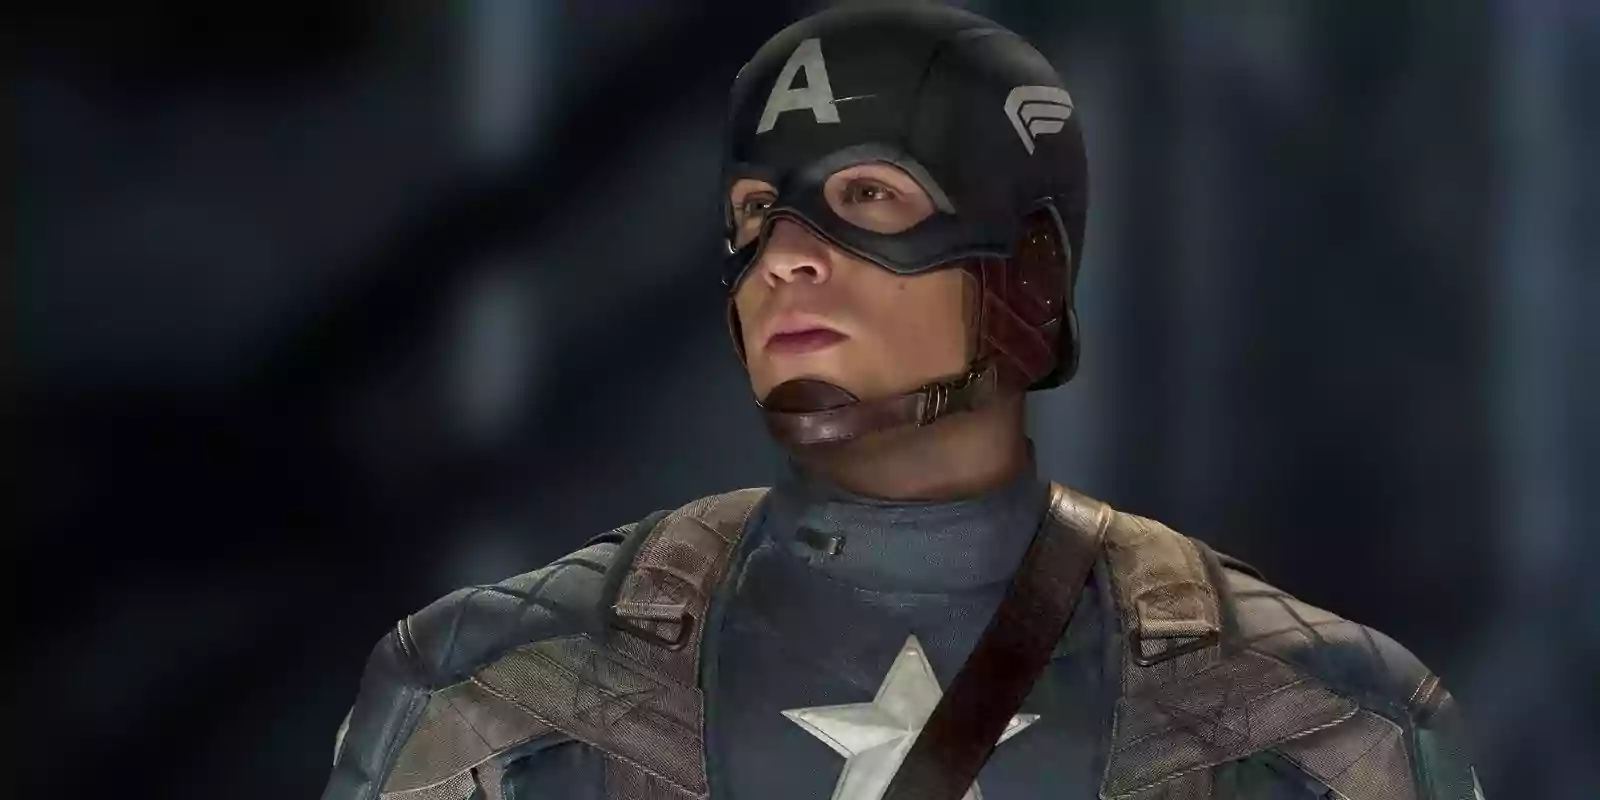 Steve Rogers isn't a virgin, according to the Captain America writers.